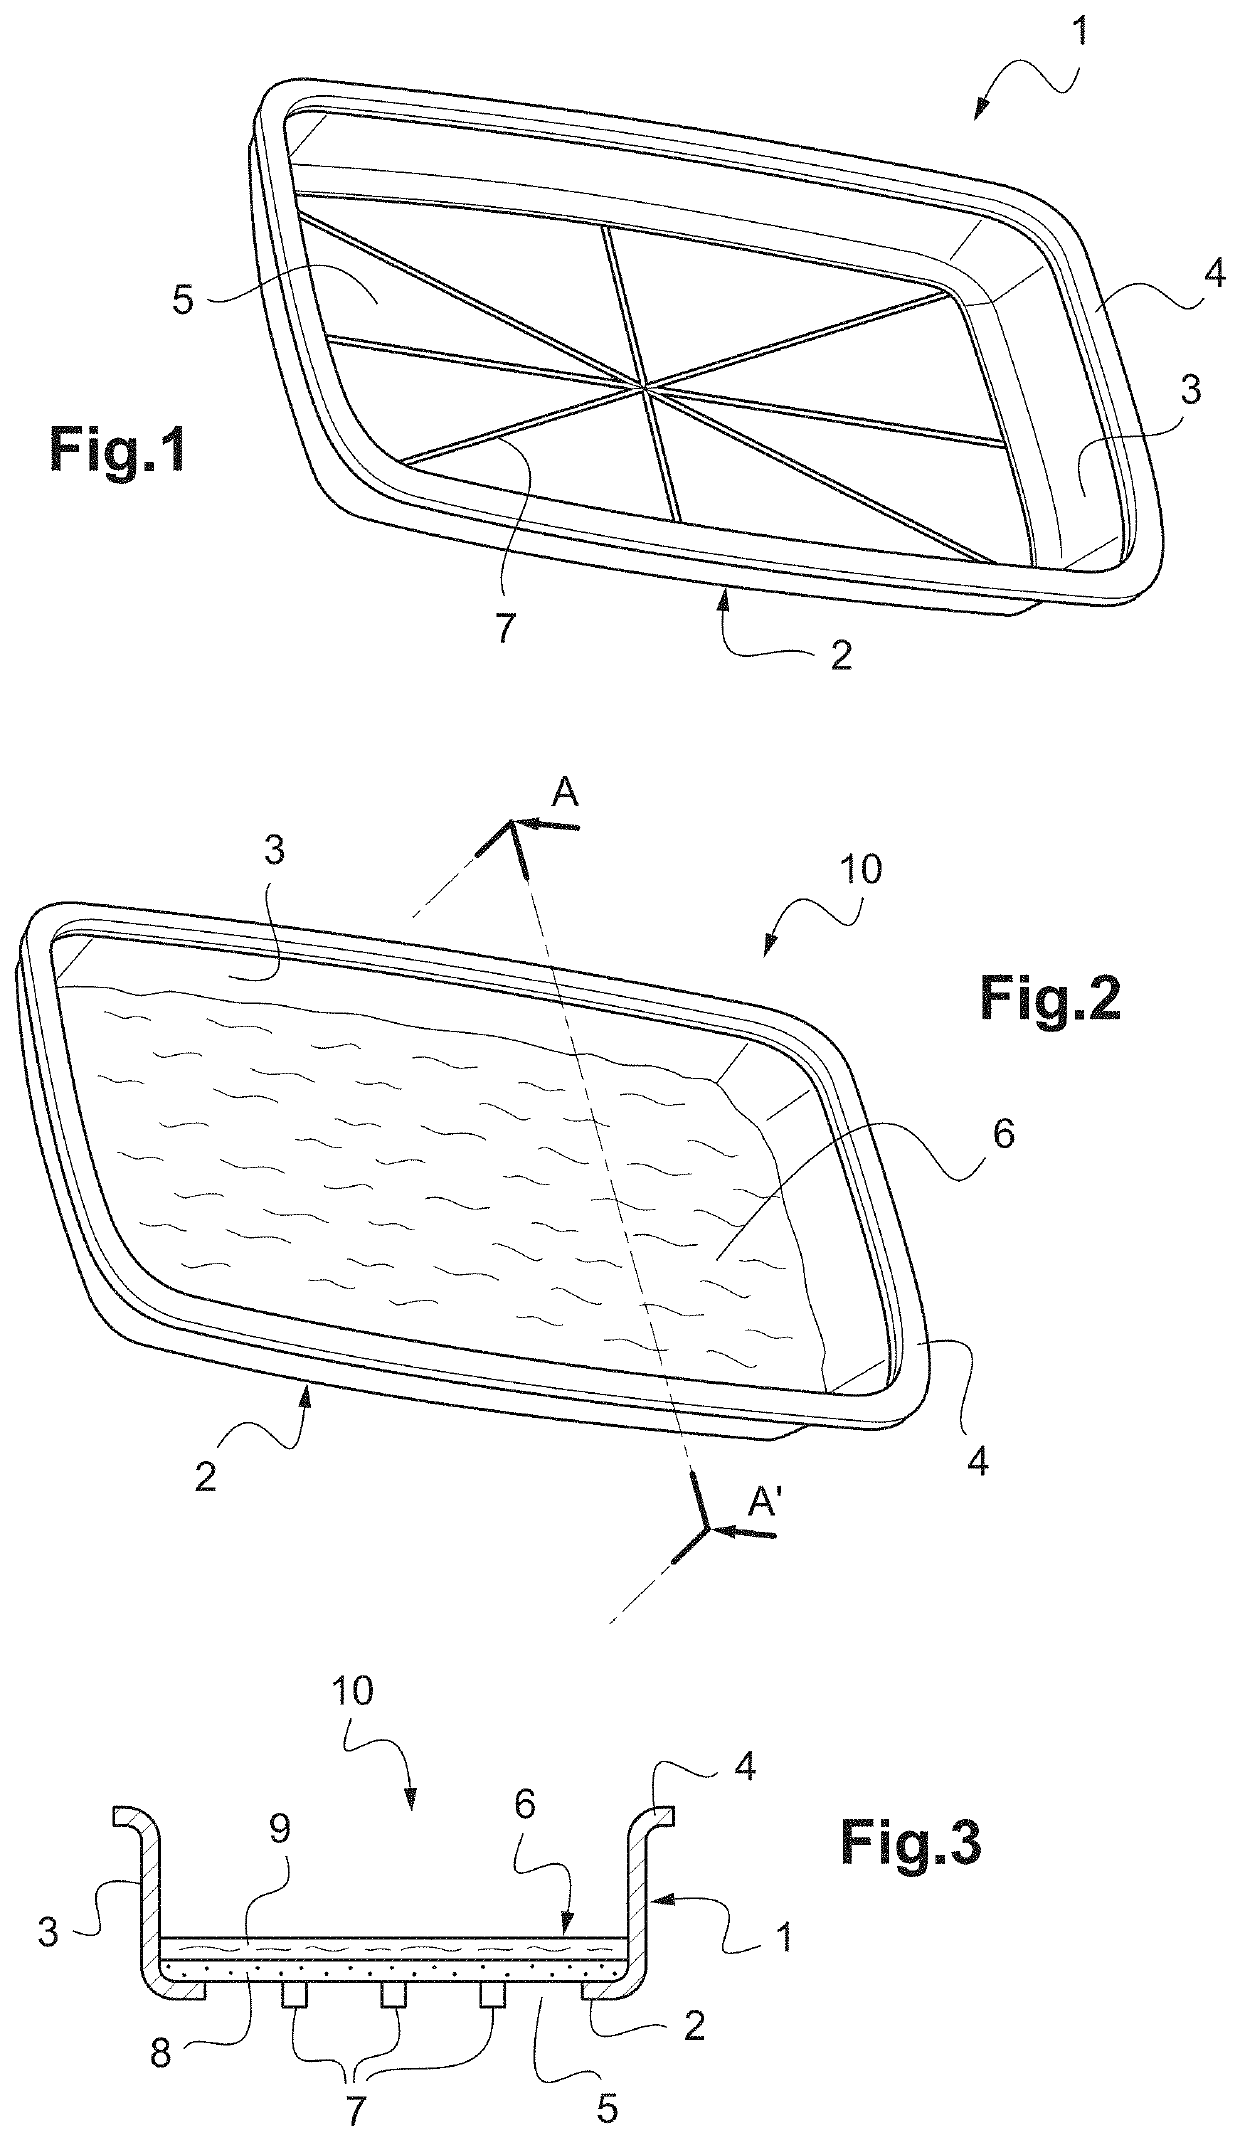 Biodegradable packaging, method for manufacturing same and uses thereof